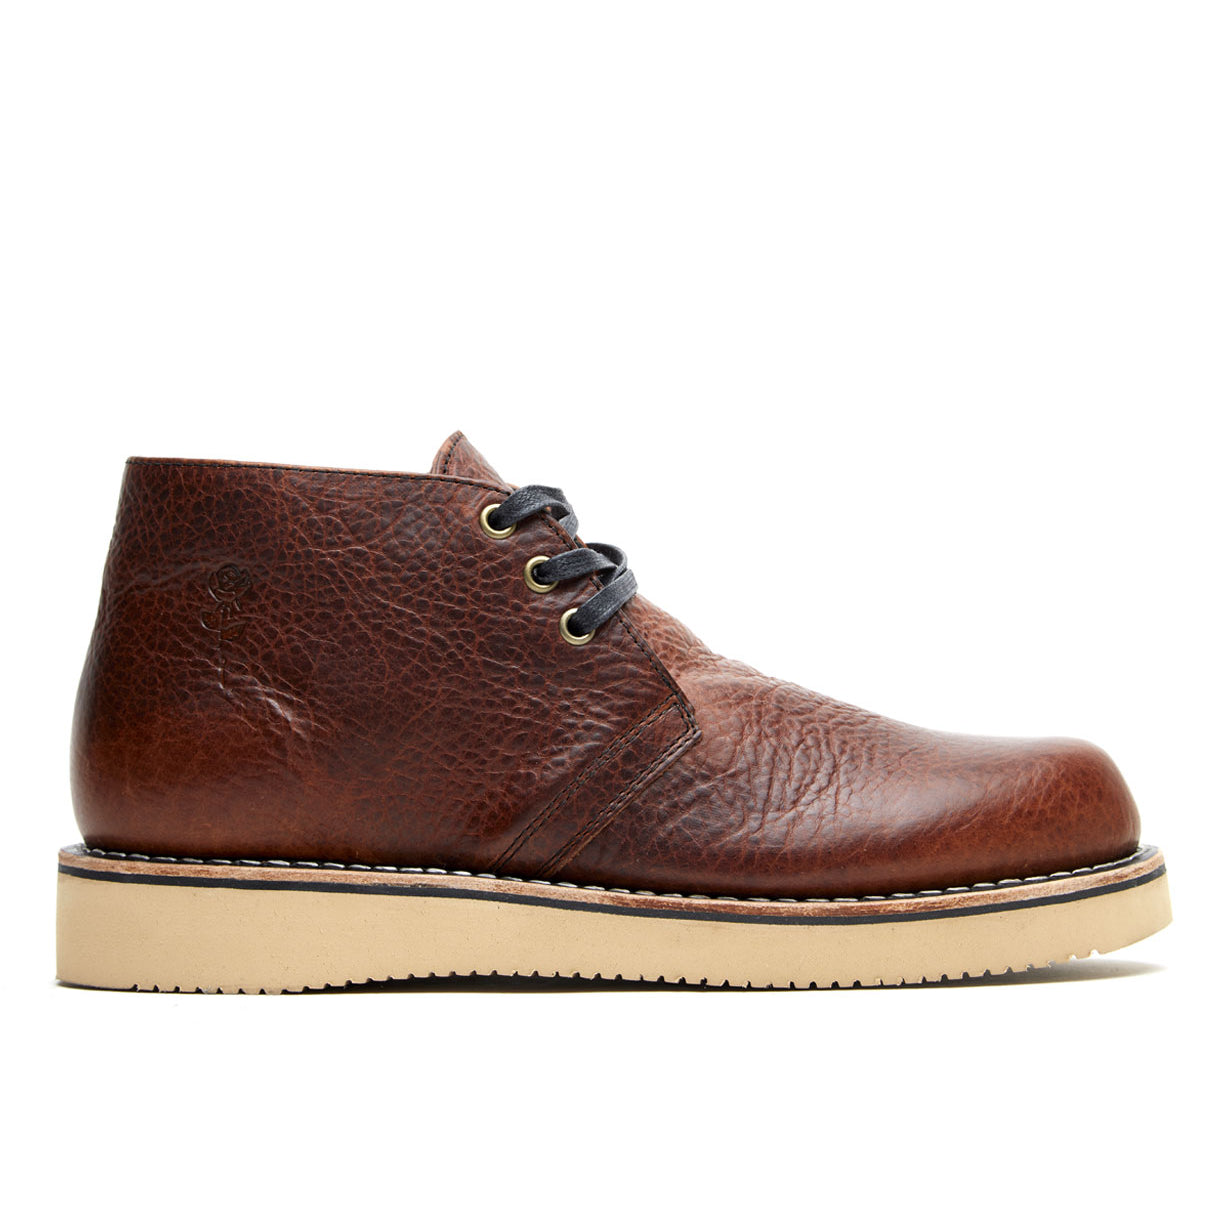 A single brown leather Santa Rosa Brand Union Cognac Bison Boot chukka with laces on a white background.